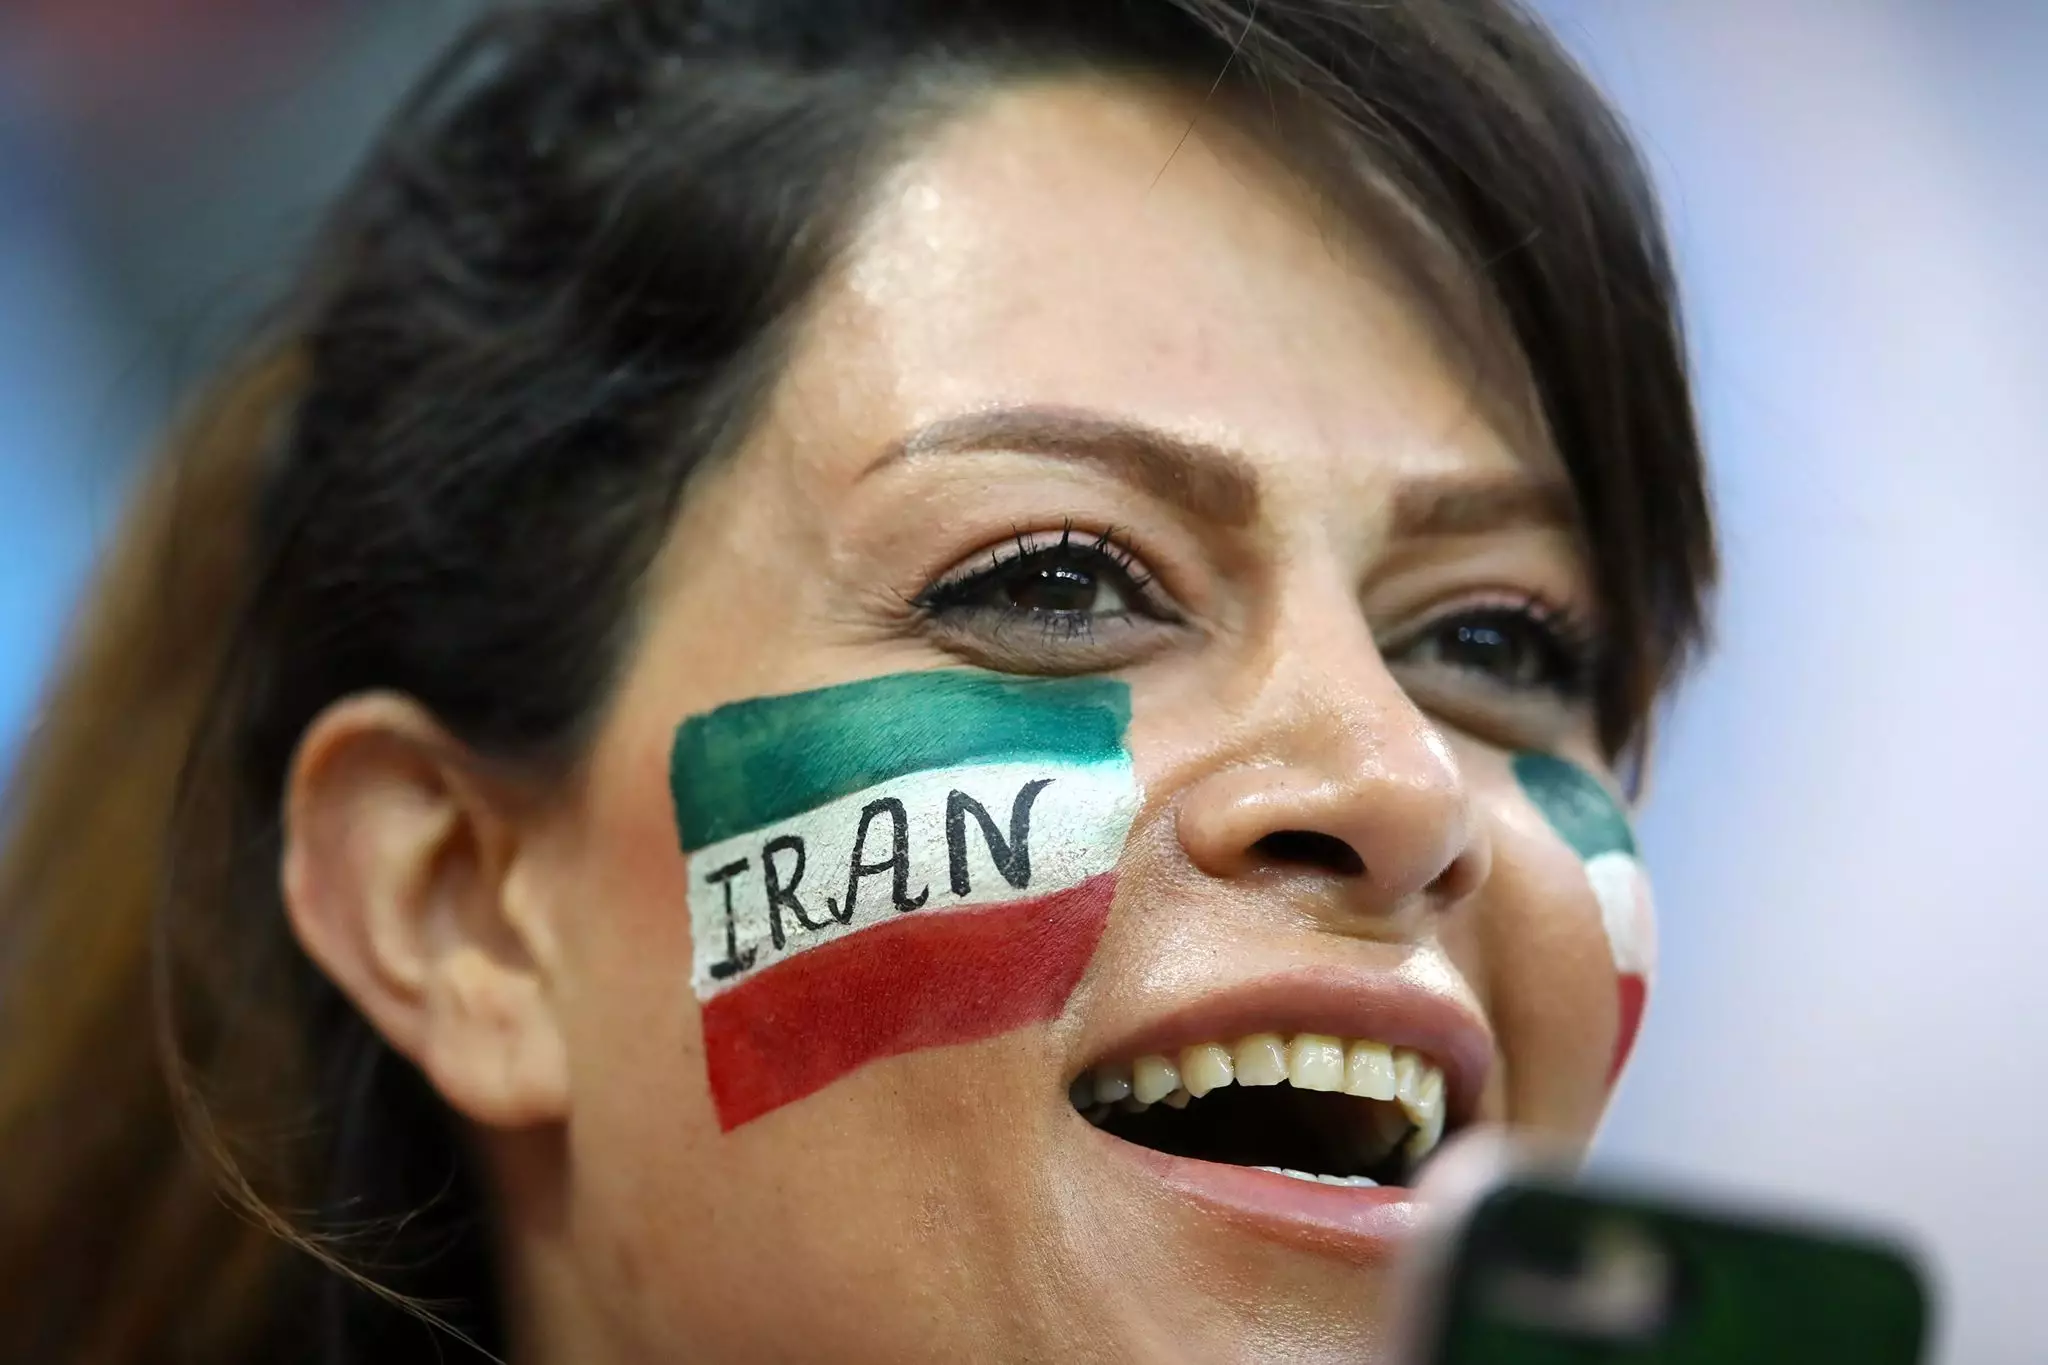 A female Iran fan watches the Spain game in the stands in Kazan. Image: PA